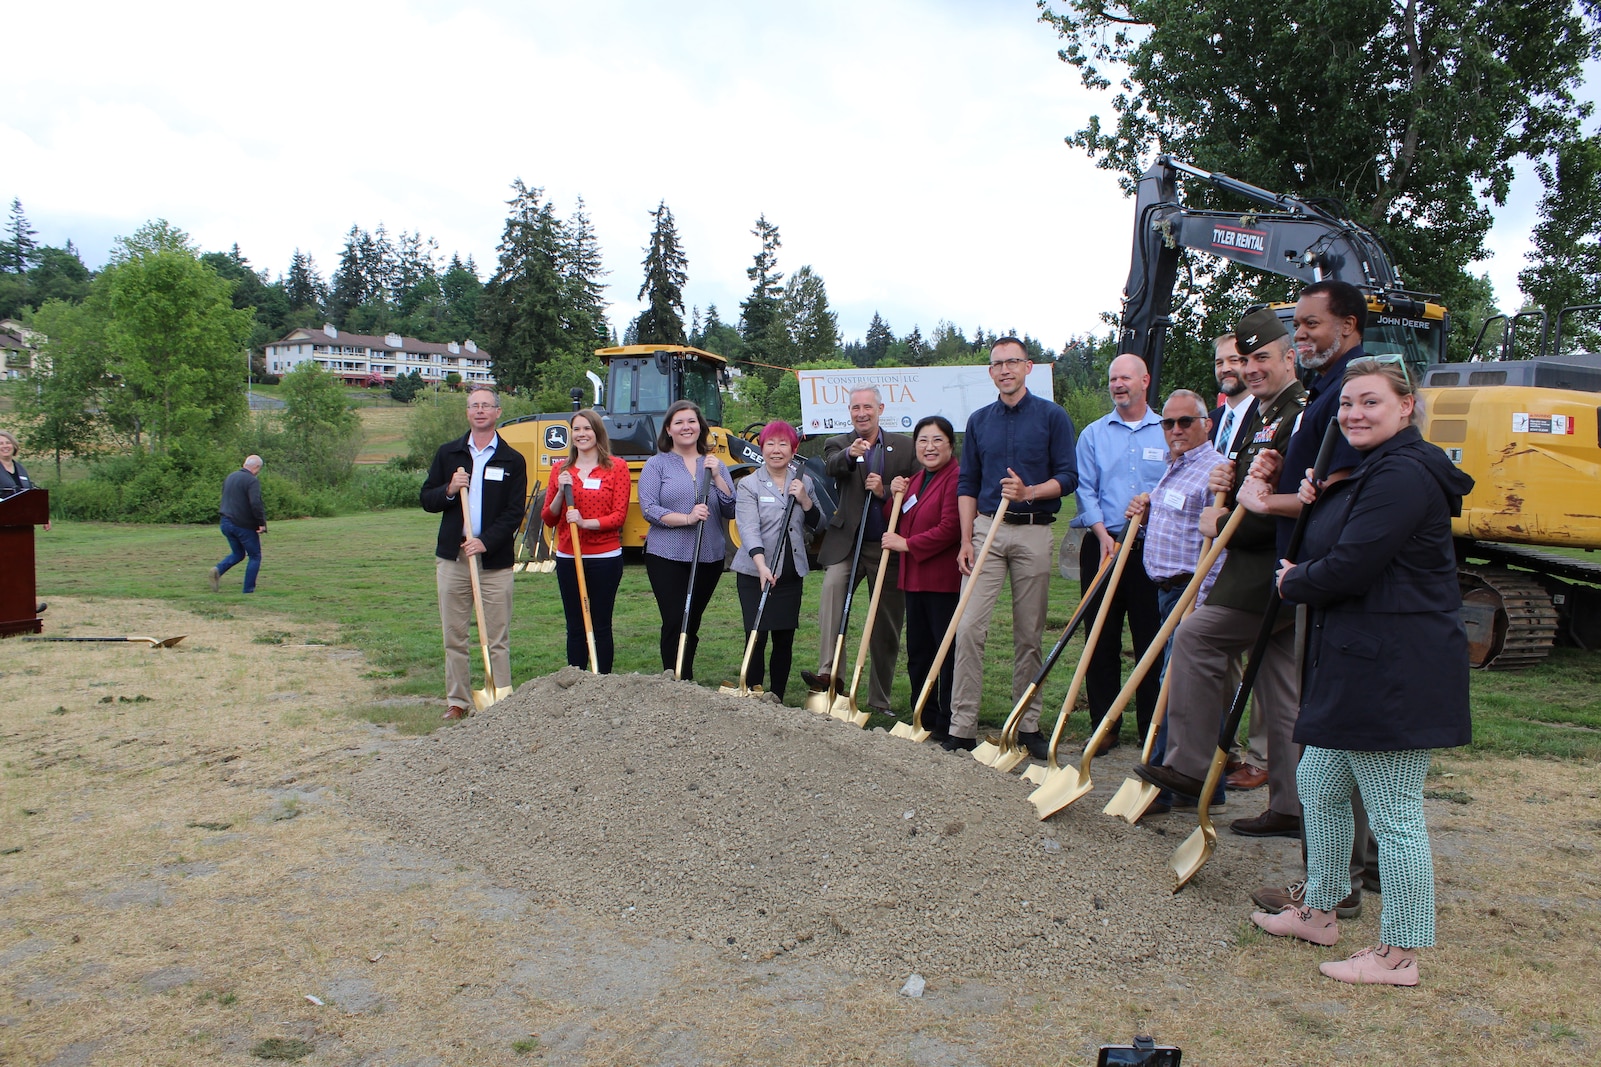 Photos of a group of people at a groundbreaking ceremony.